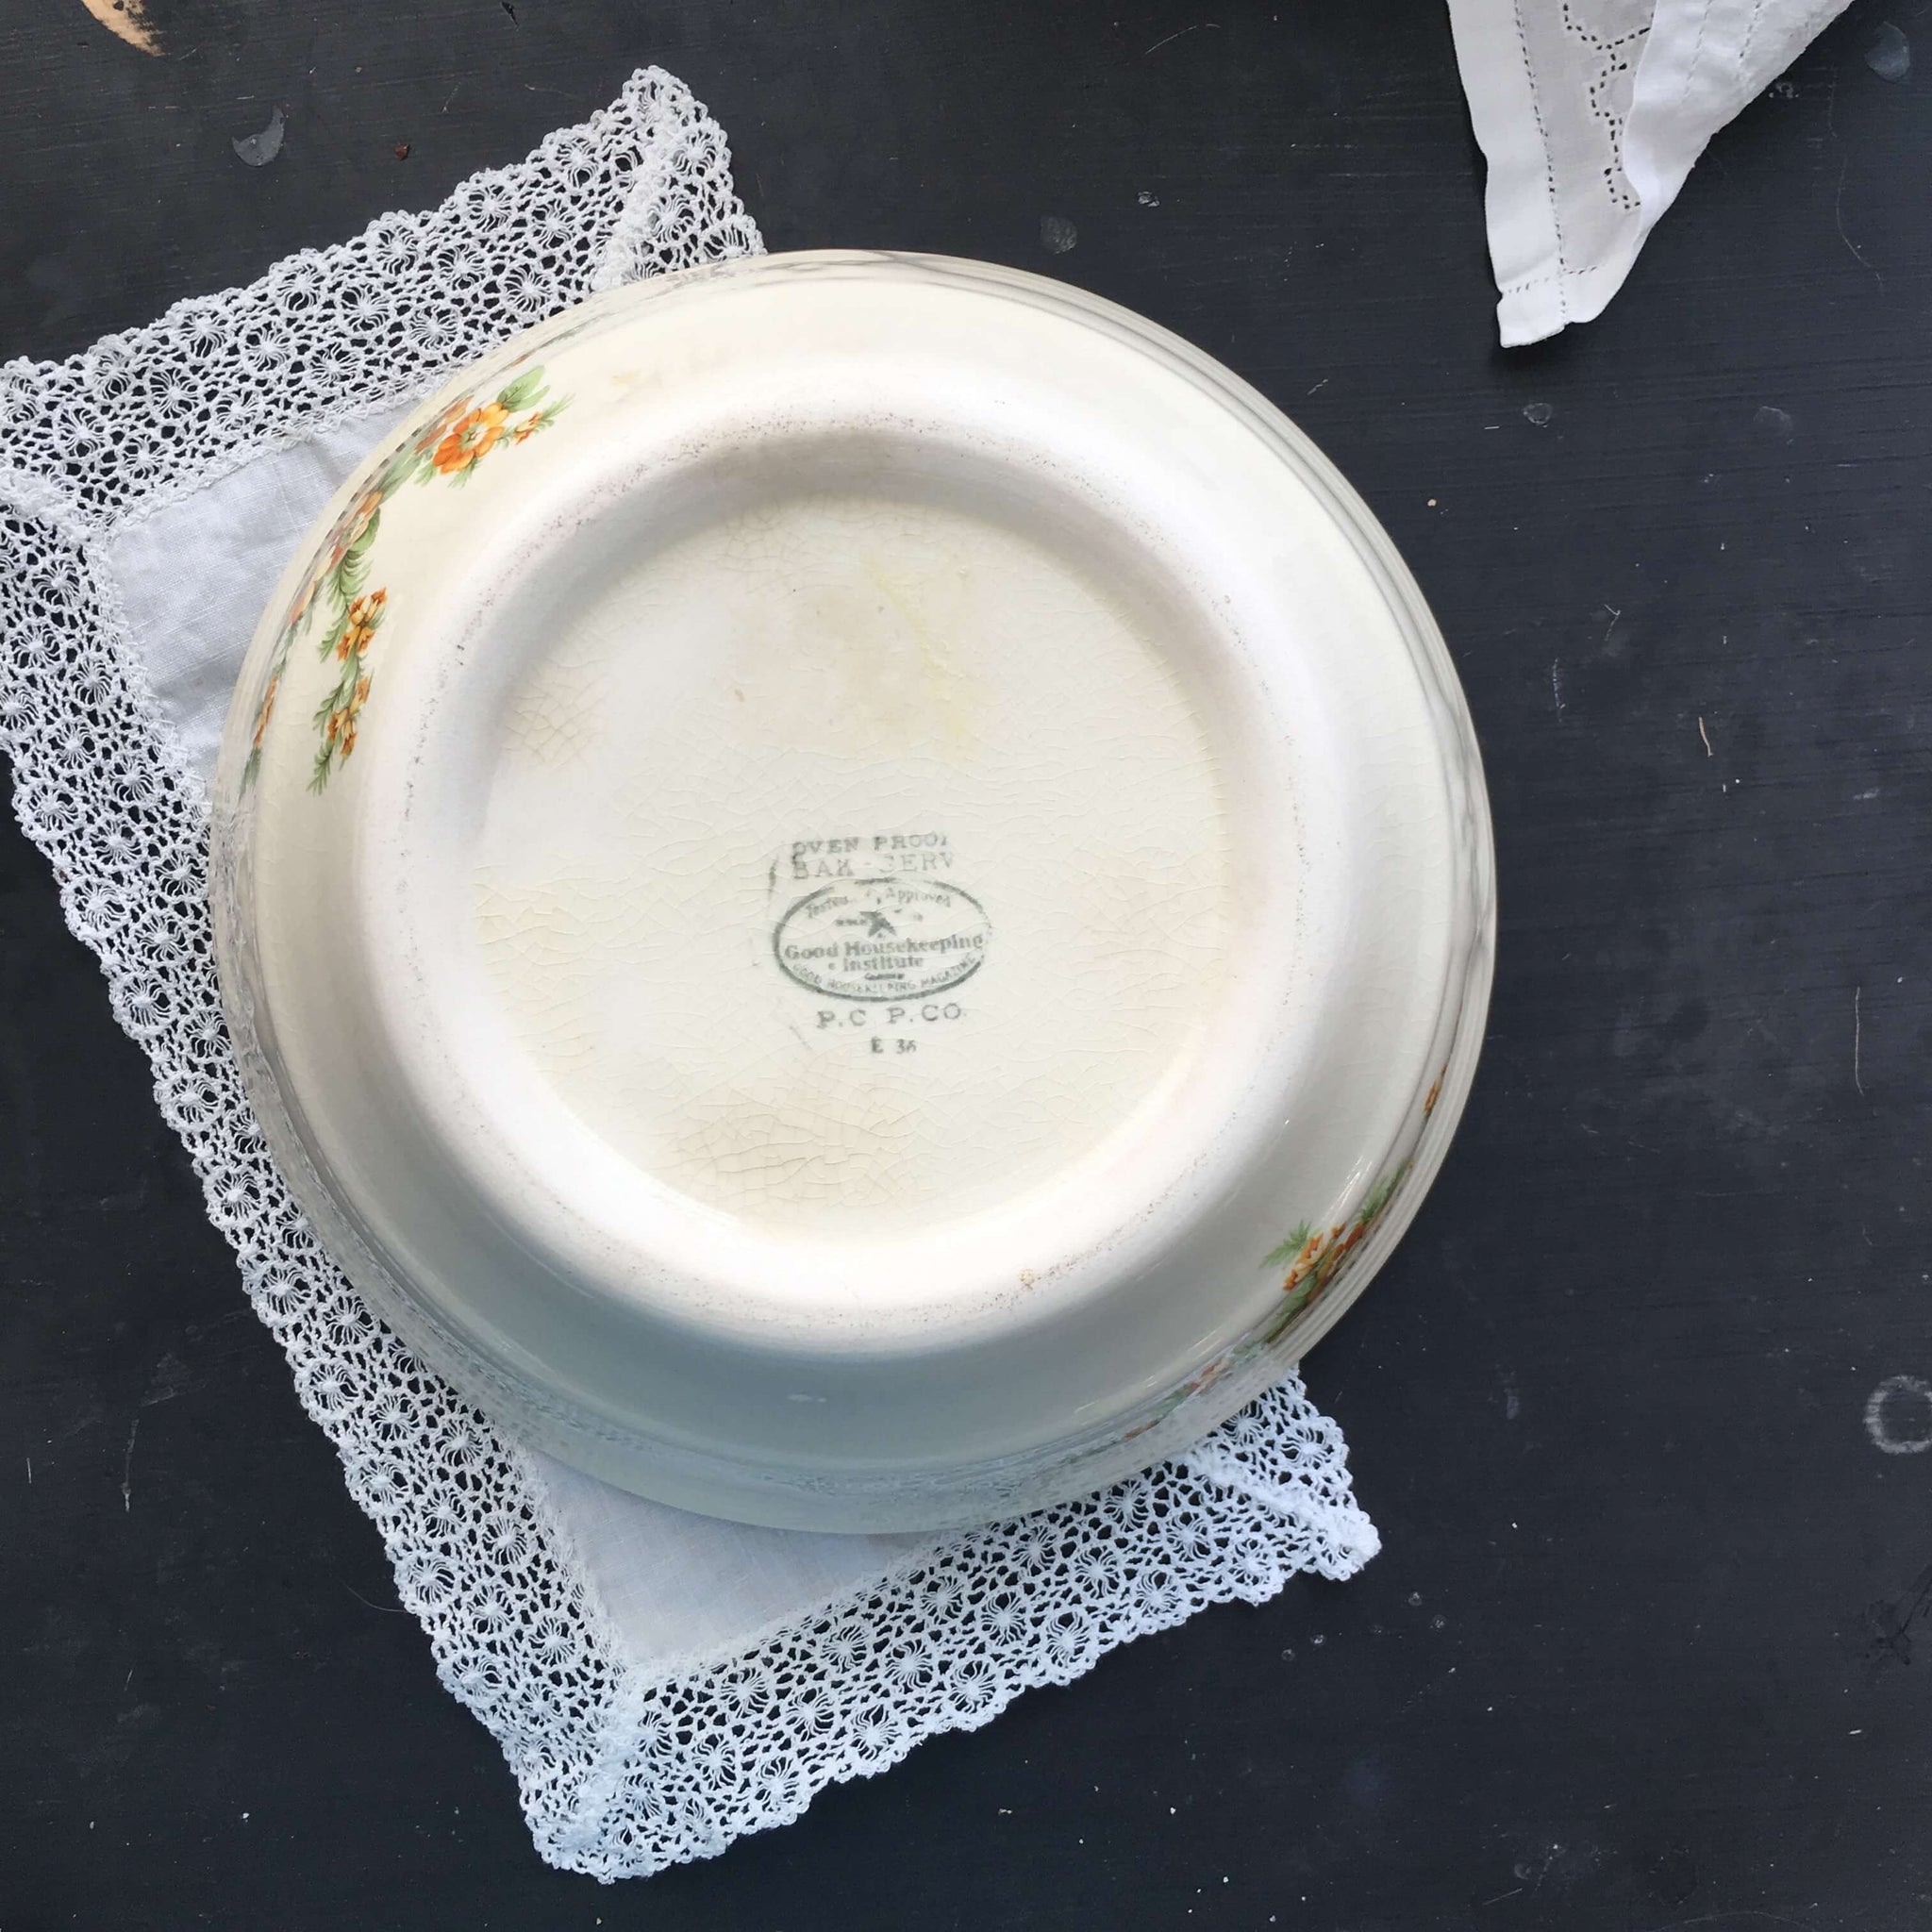 Vintage 1930s Good Housekeeping Institute Floral Oven Proof Kitchen Bowl - Golden Acacia Pattern by Paden City Pottery circa 1936